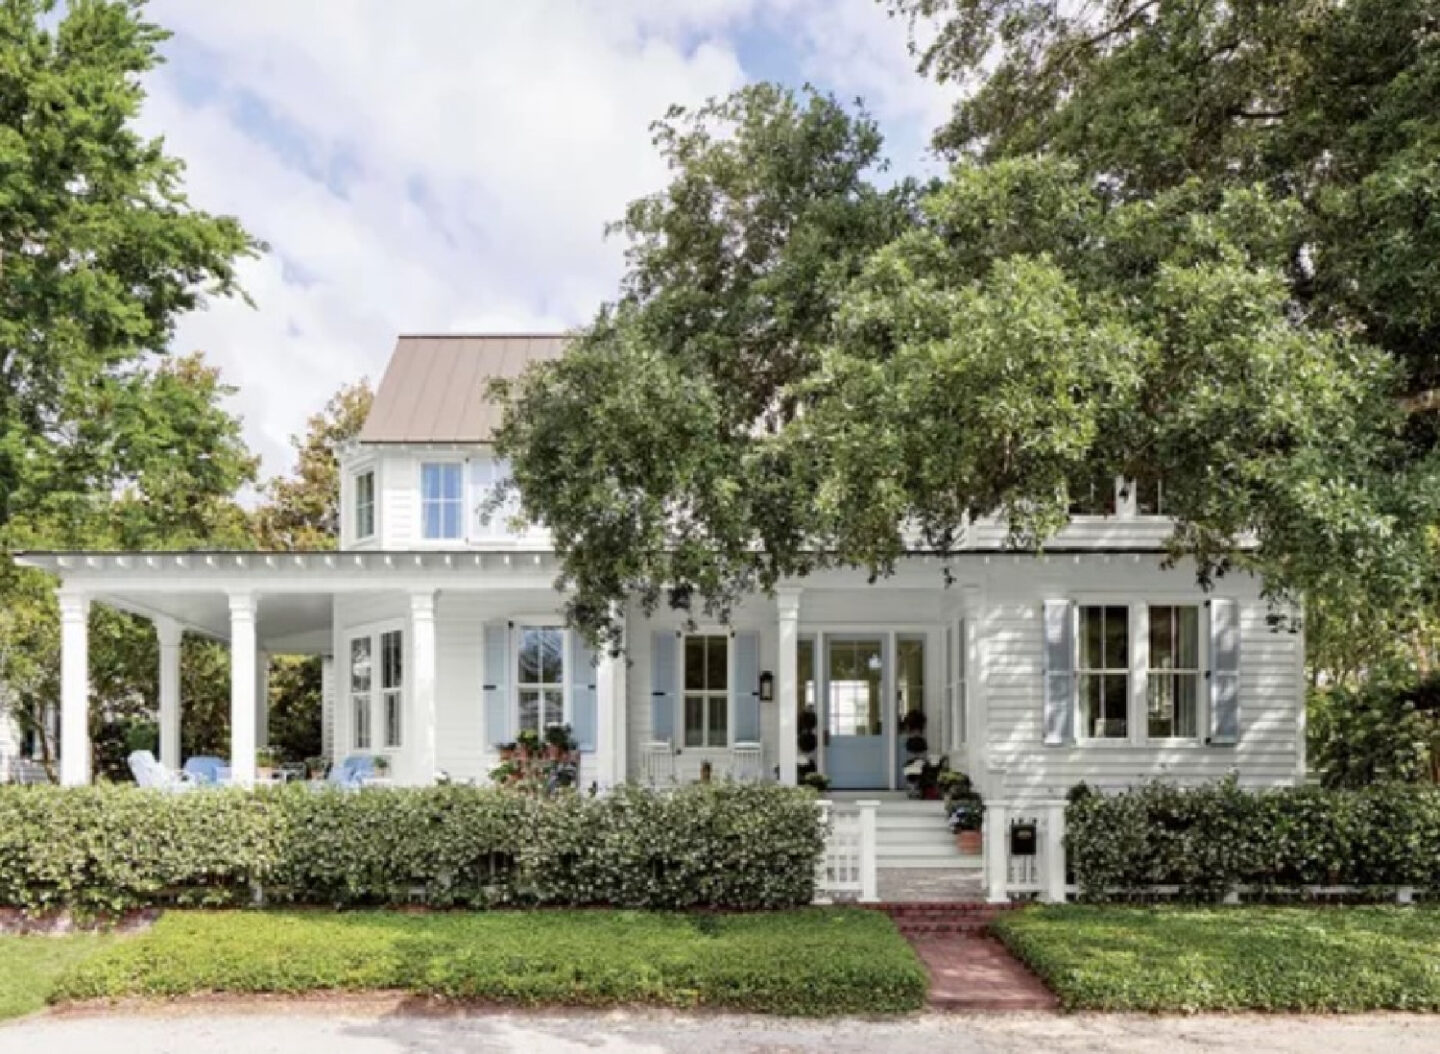 BM Simply White siding and BM Blue Porcelain shutters on a beautiful Charleston house exterior - Julia Berolzheimer's home in Southern Living (photo: Hector Manuel Sanchez). #bmsimplywhite